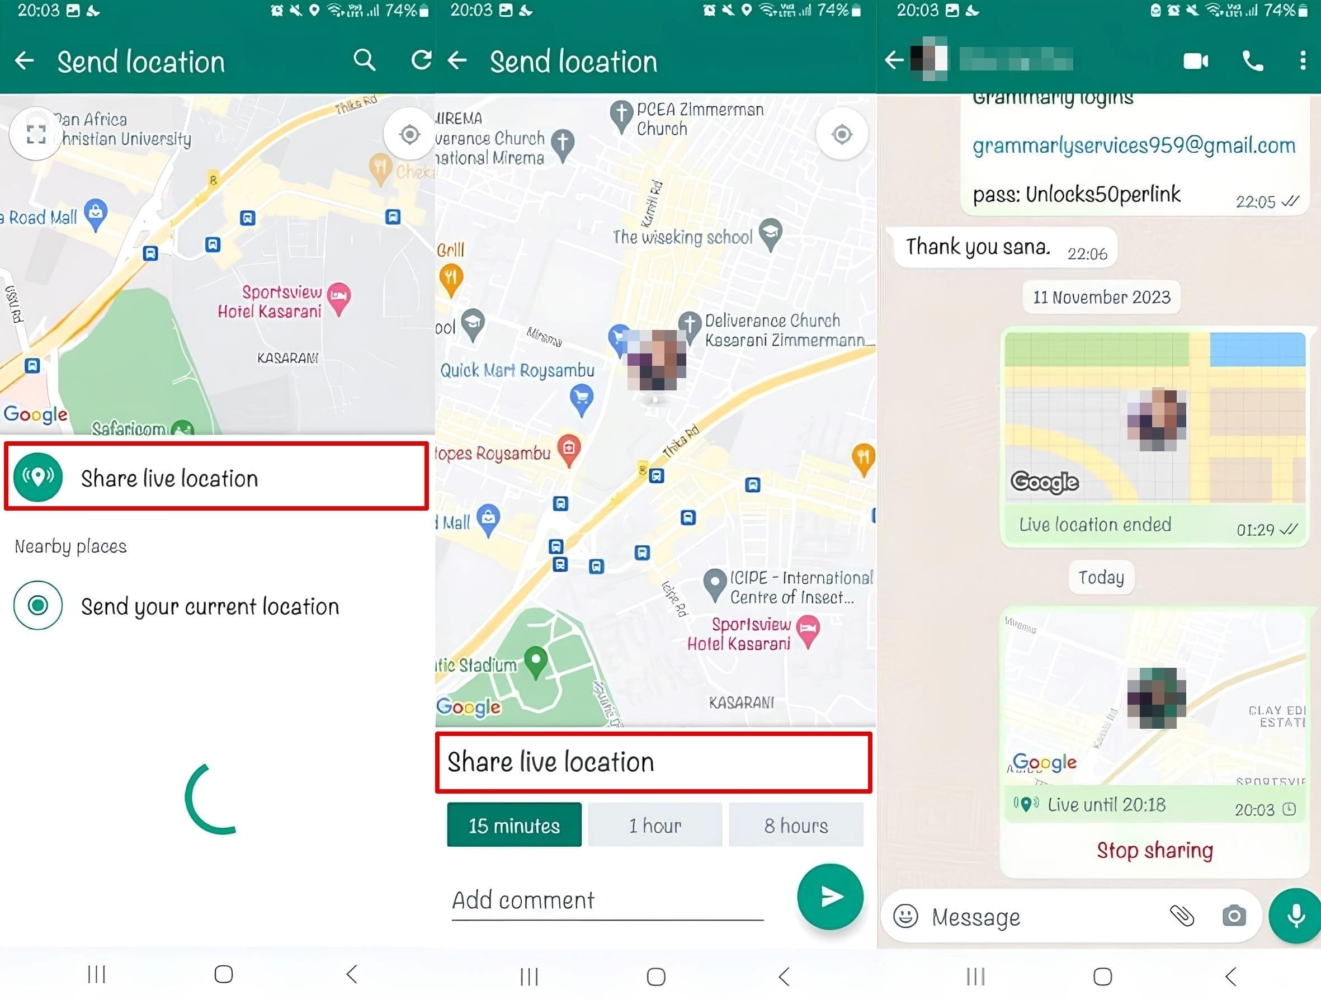 An image of the WhatsApp location-sharing feature